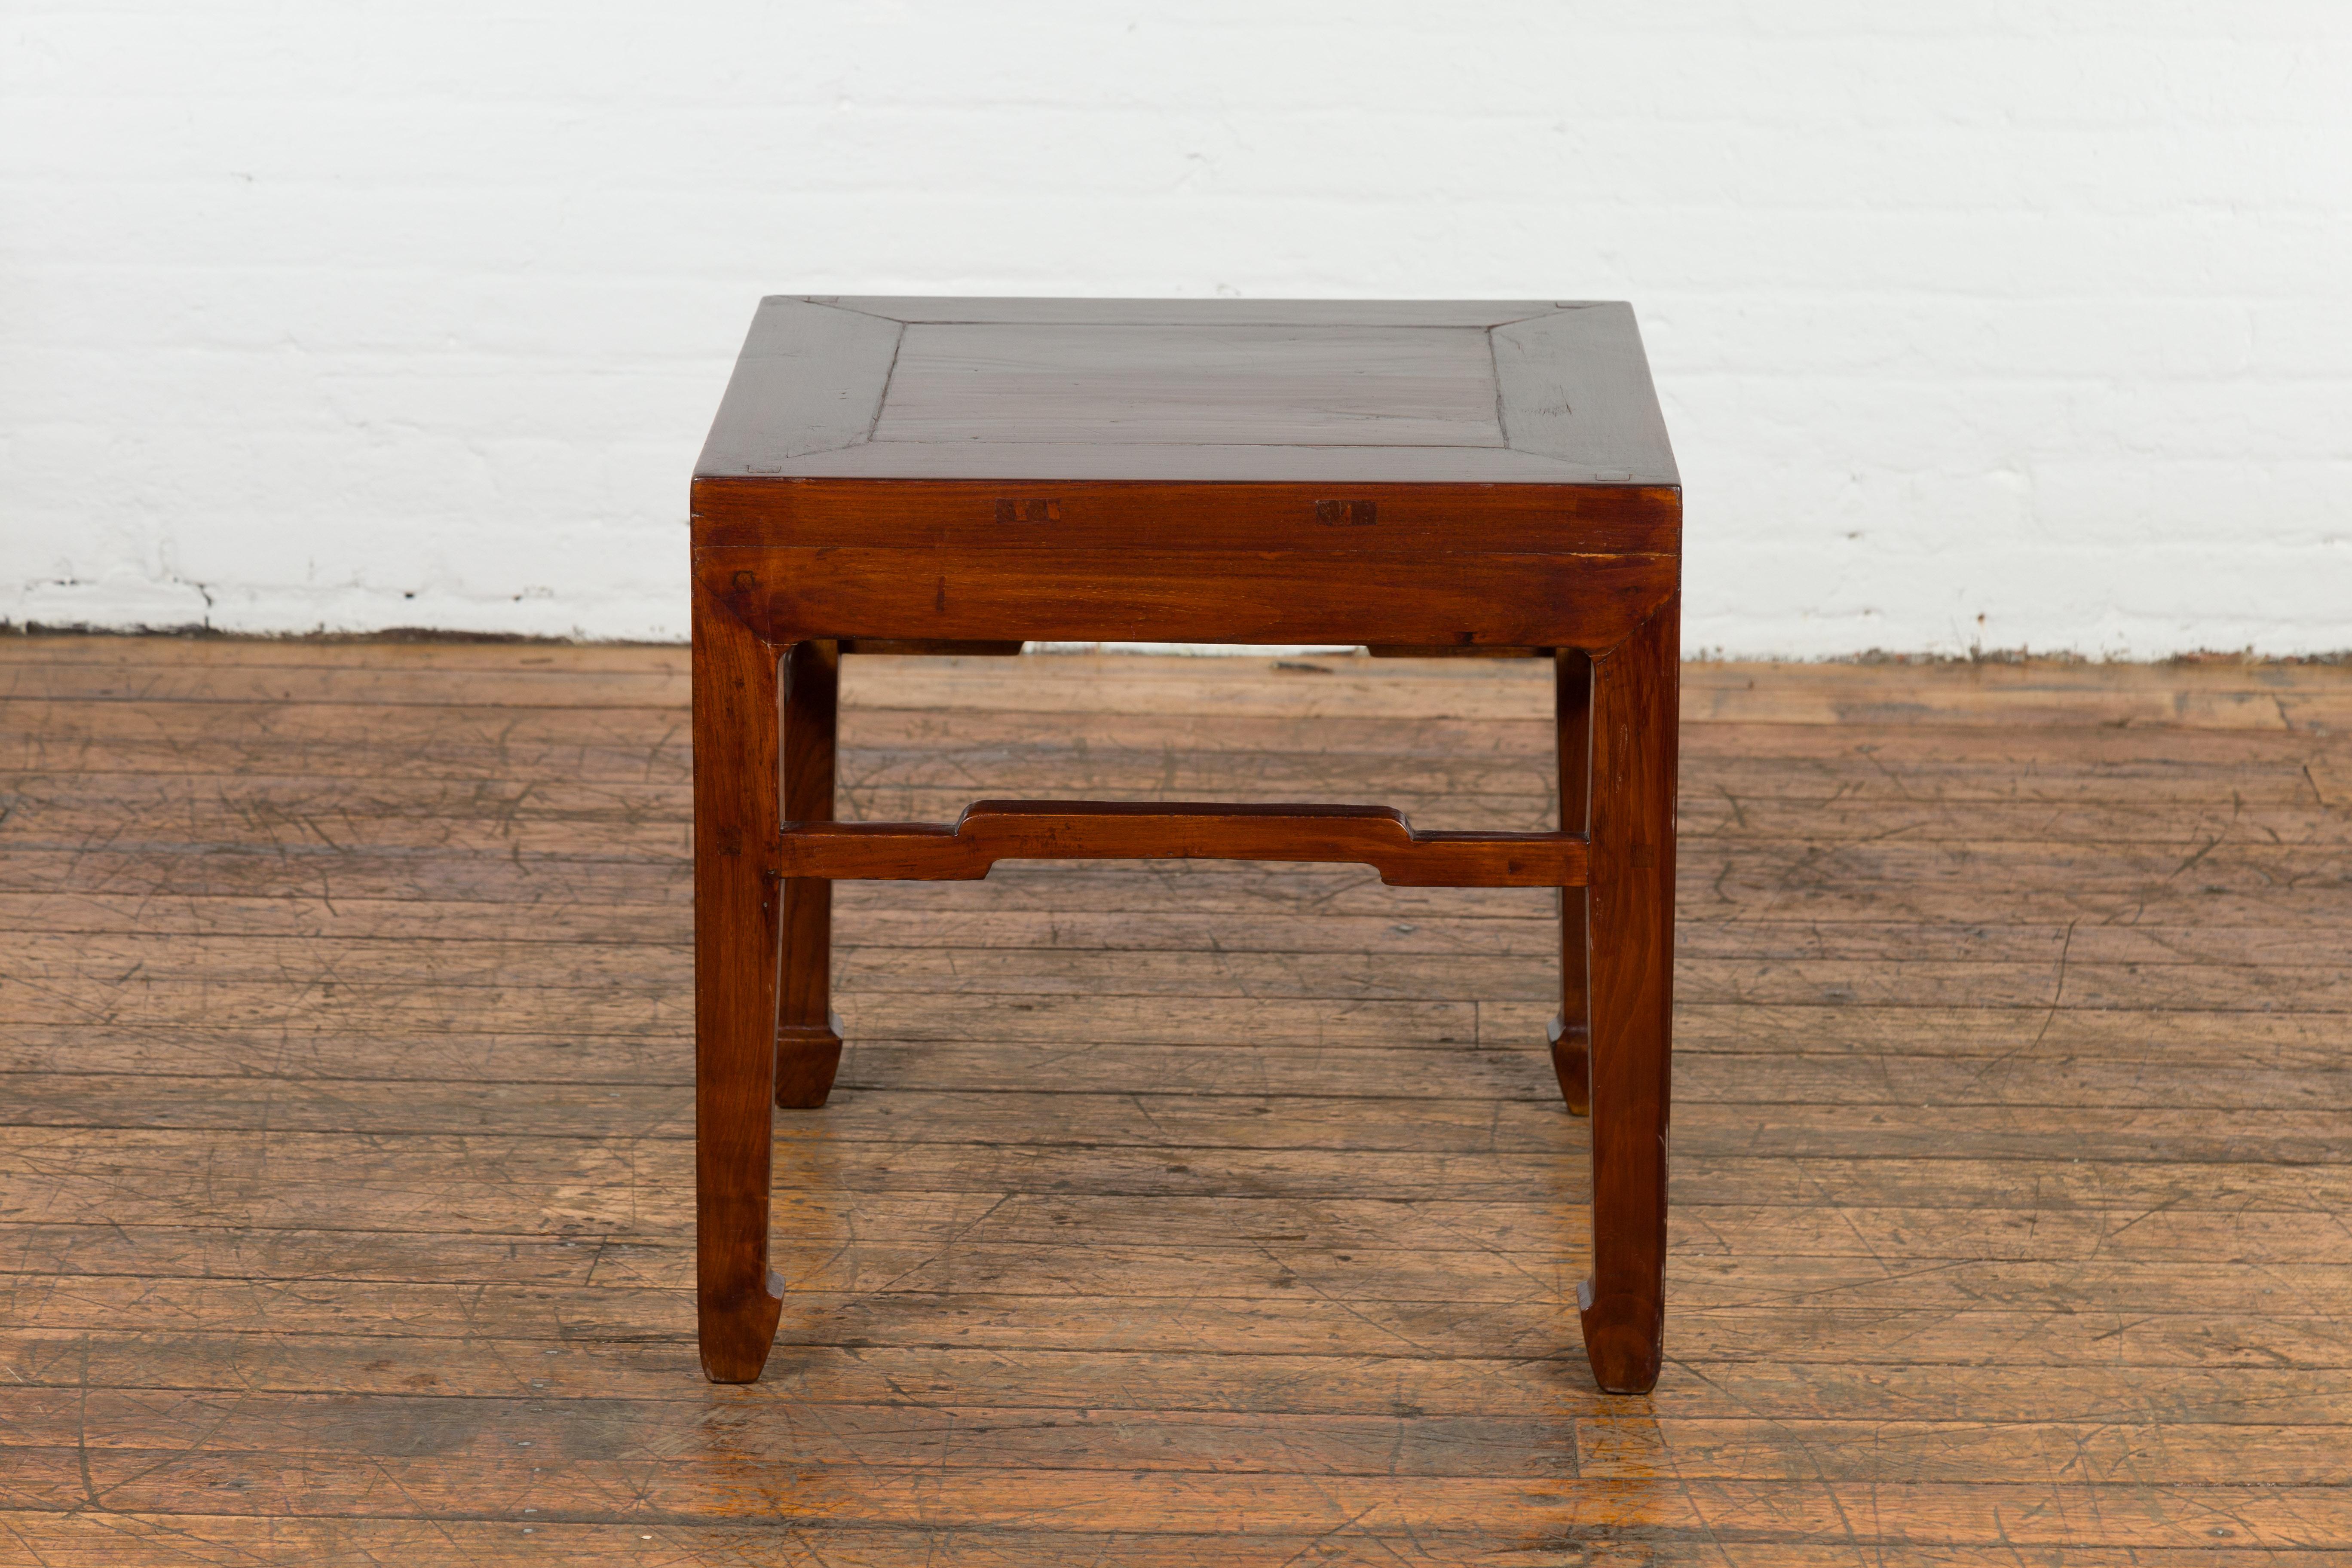 Chinese Qing Dynasty Period 19th Century Side Table with Humpback Stretchers For Sale 14